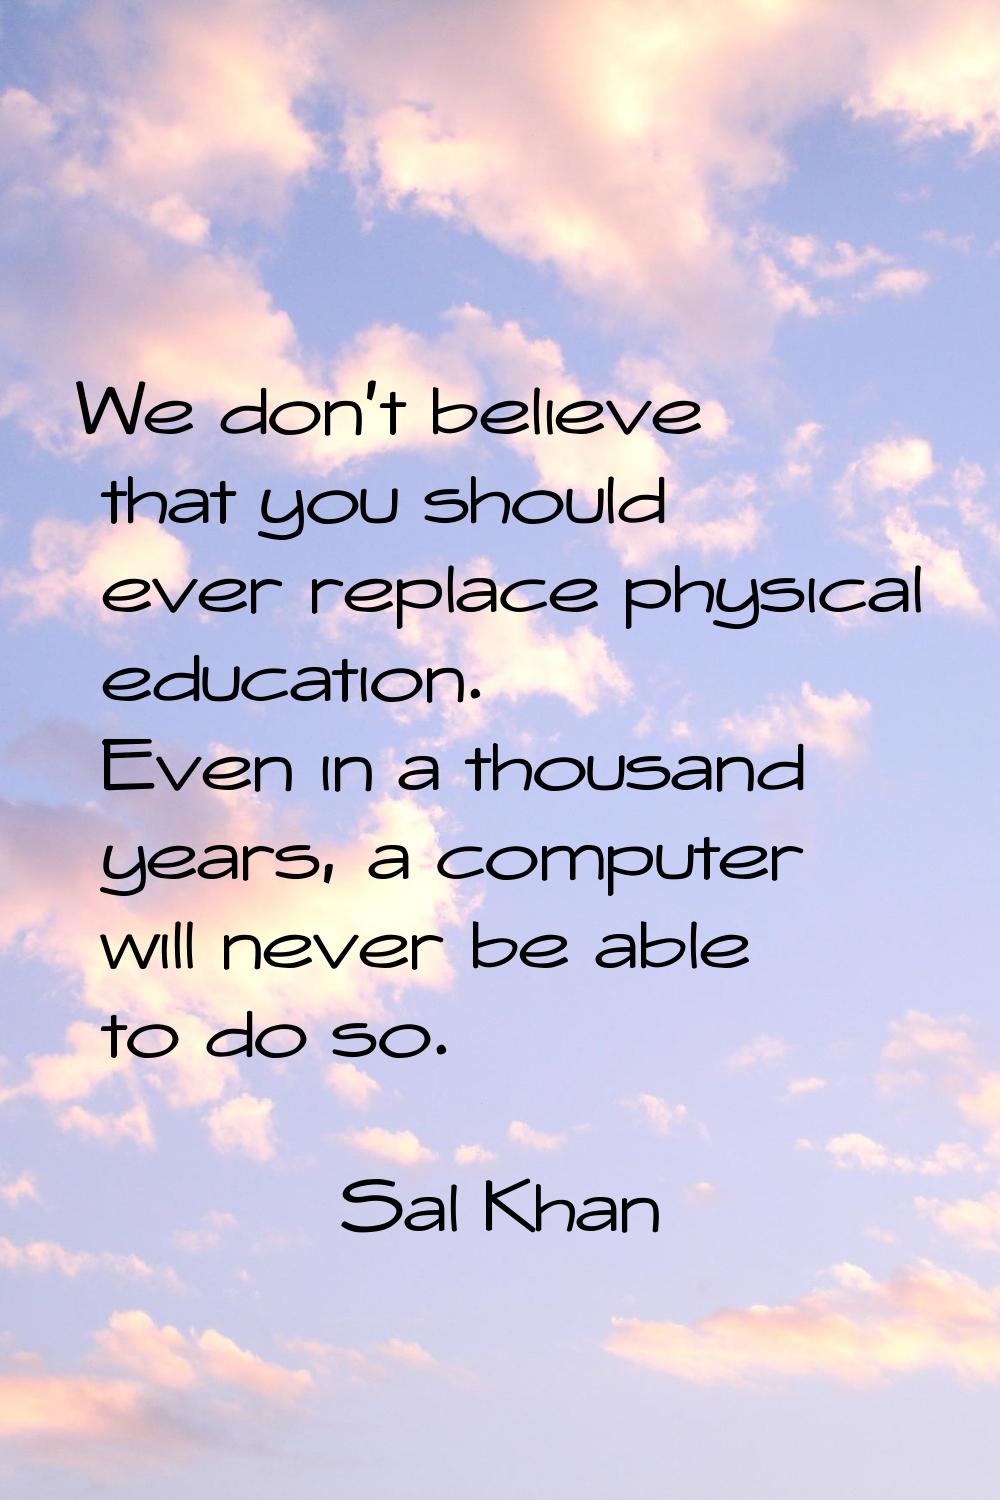 We don't believe that you should ever replace physical education. Even in a thousand years, a compu